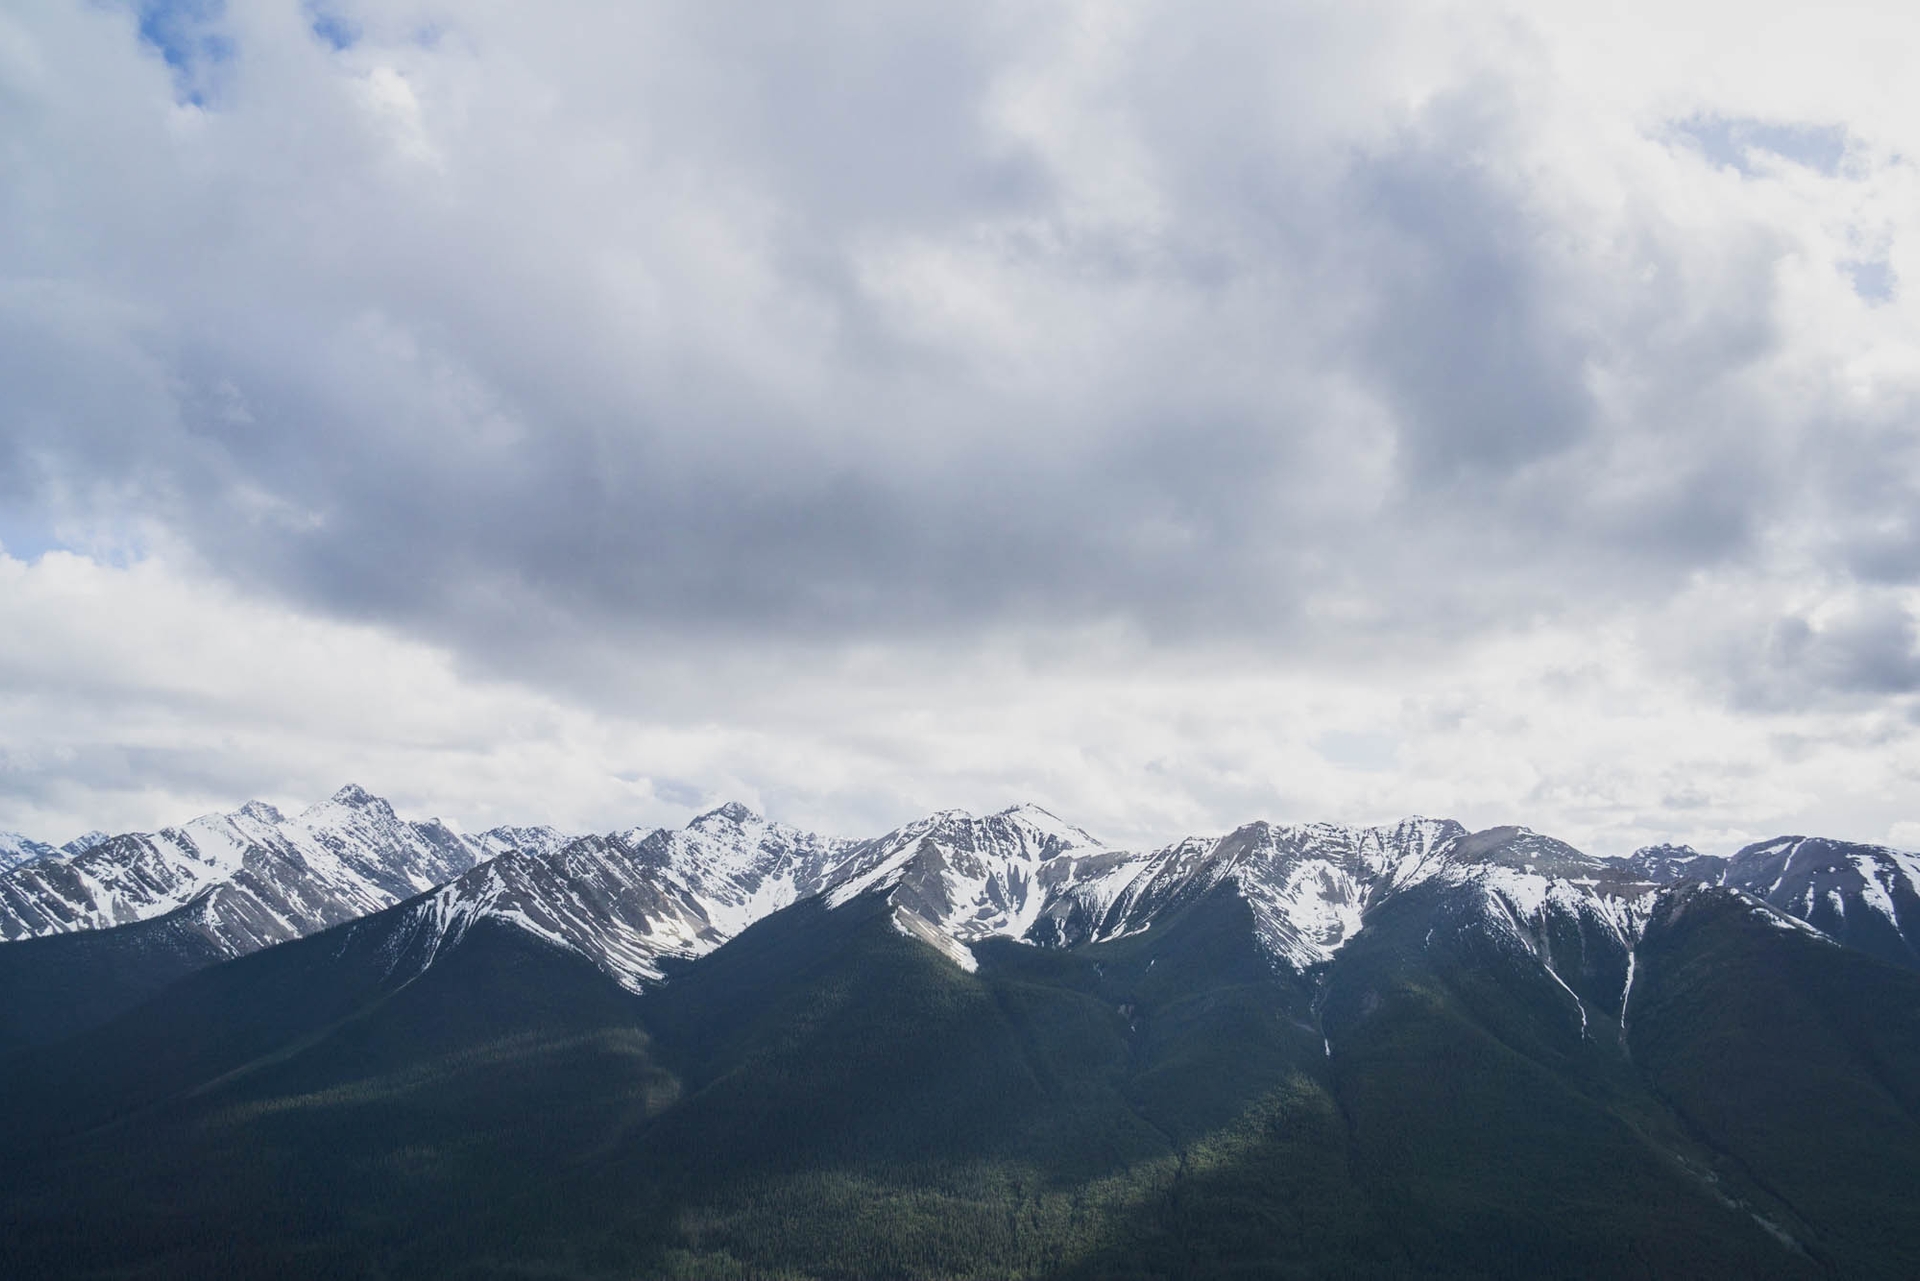 A view of the Canadian Rocky Mountains at the top of the Banff Gondola in Alberta, Canada